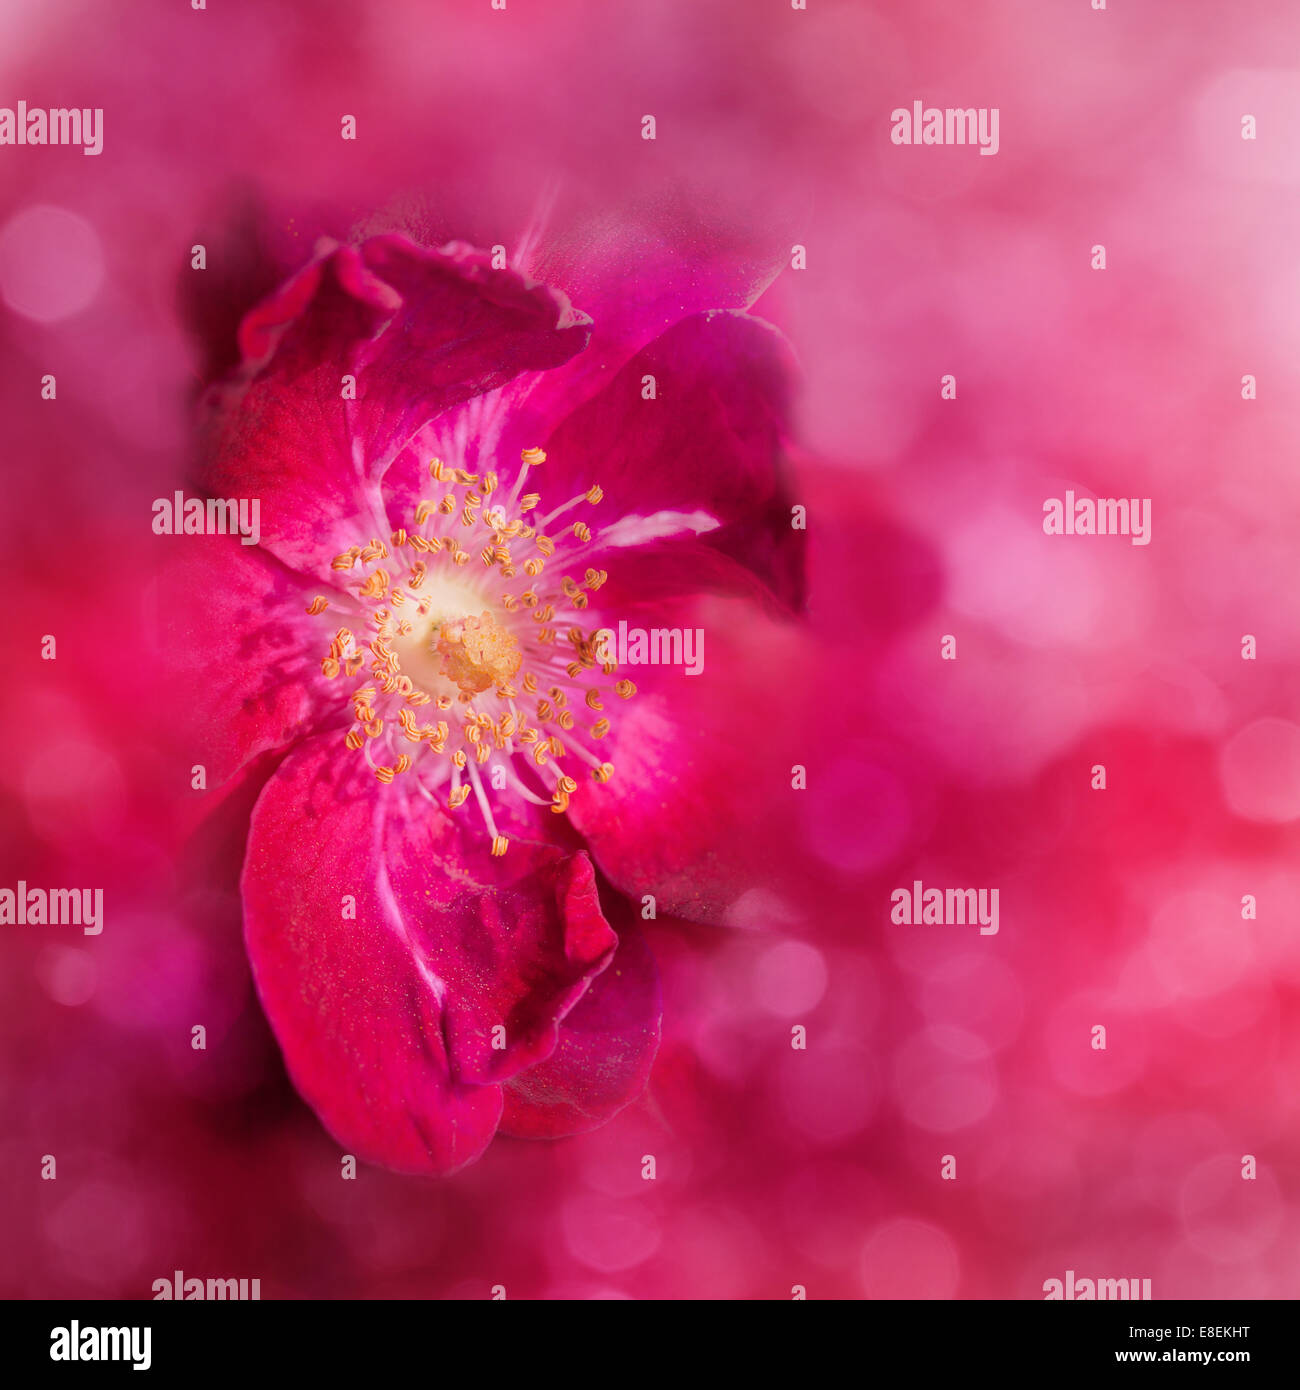 Dreamy, abstract image of a red rose, with bokeh Stock Photo